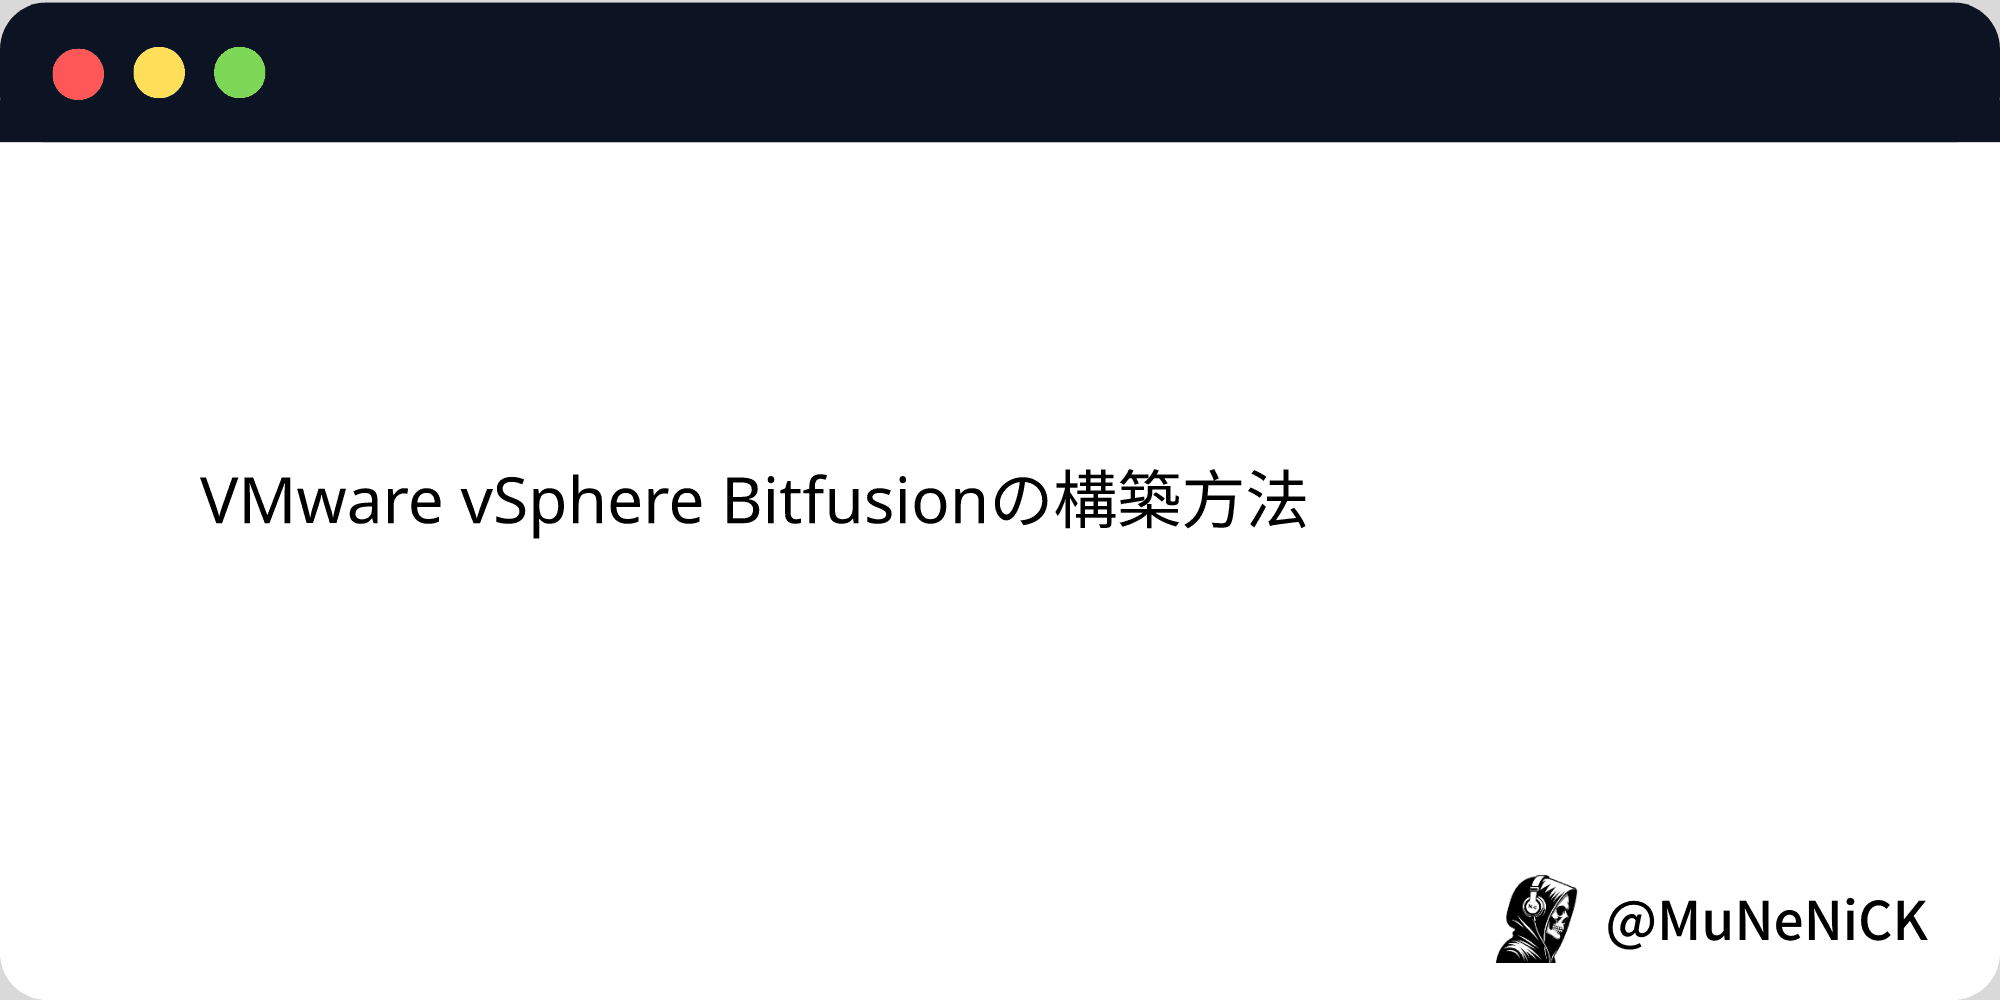 Cover Image for VMware vSphere Bitfusionの構築方法